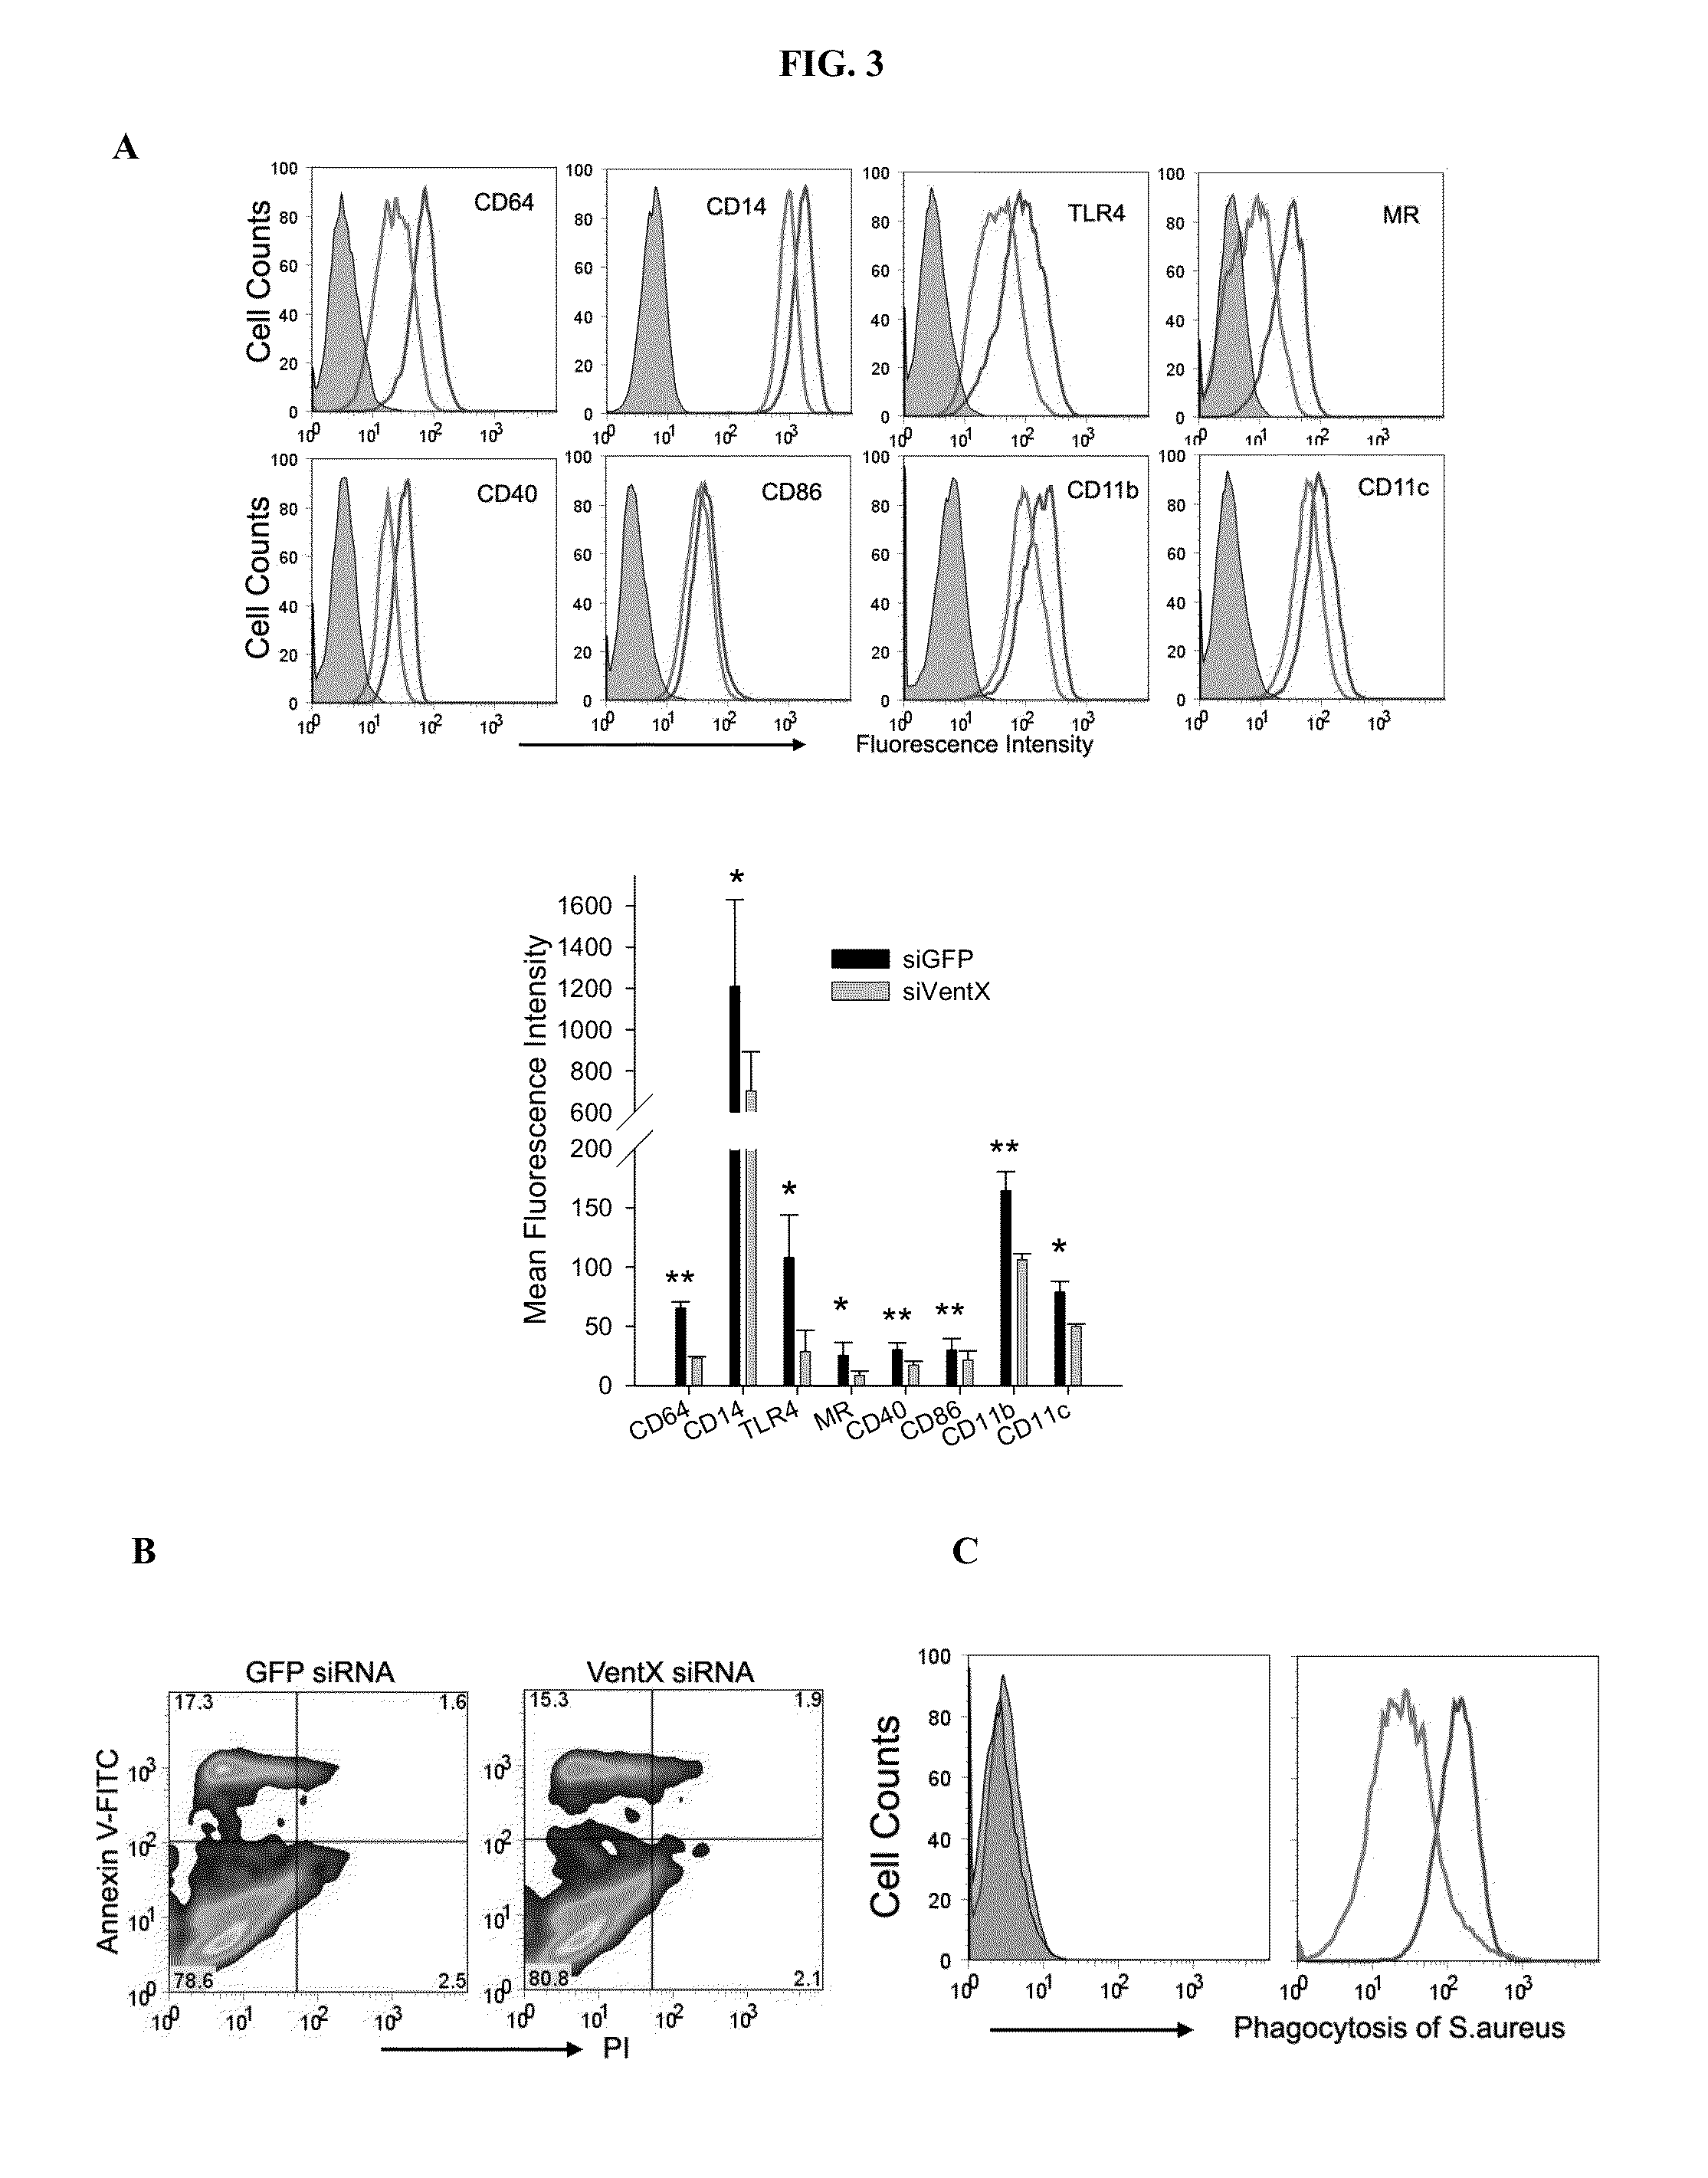 Human homeobox gene ventx and macrophage terminal differentiation and activation, compositions and methods thereof